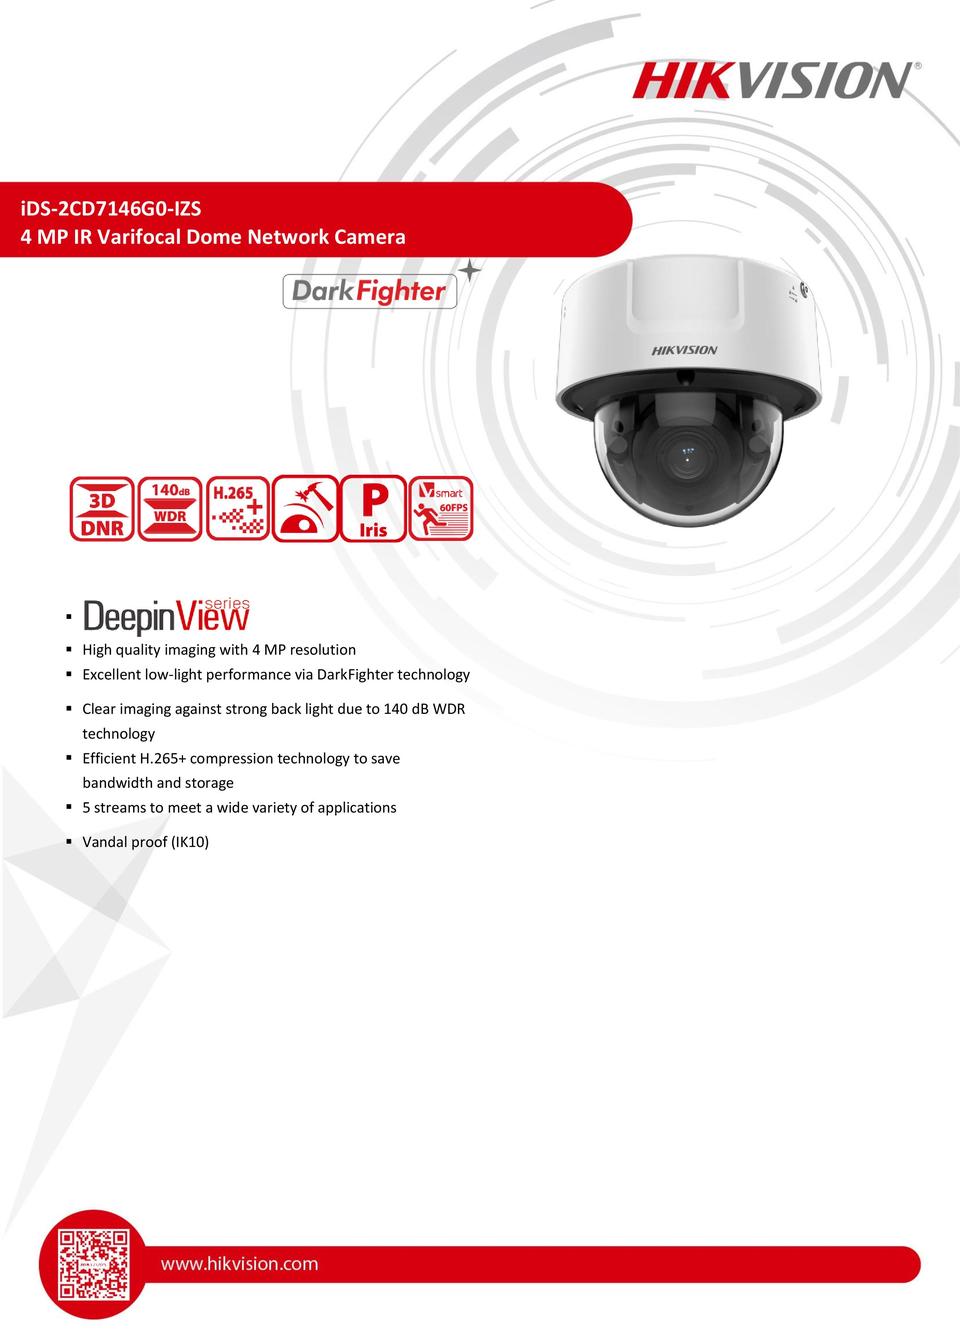 Hikvision iDS-2CD7146G0-IZS 4MP DeepinView Facial Recognition Dome Camera with Motorised Lens 0